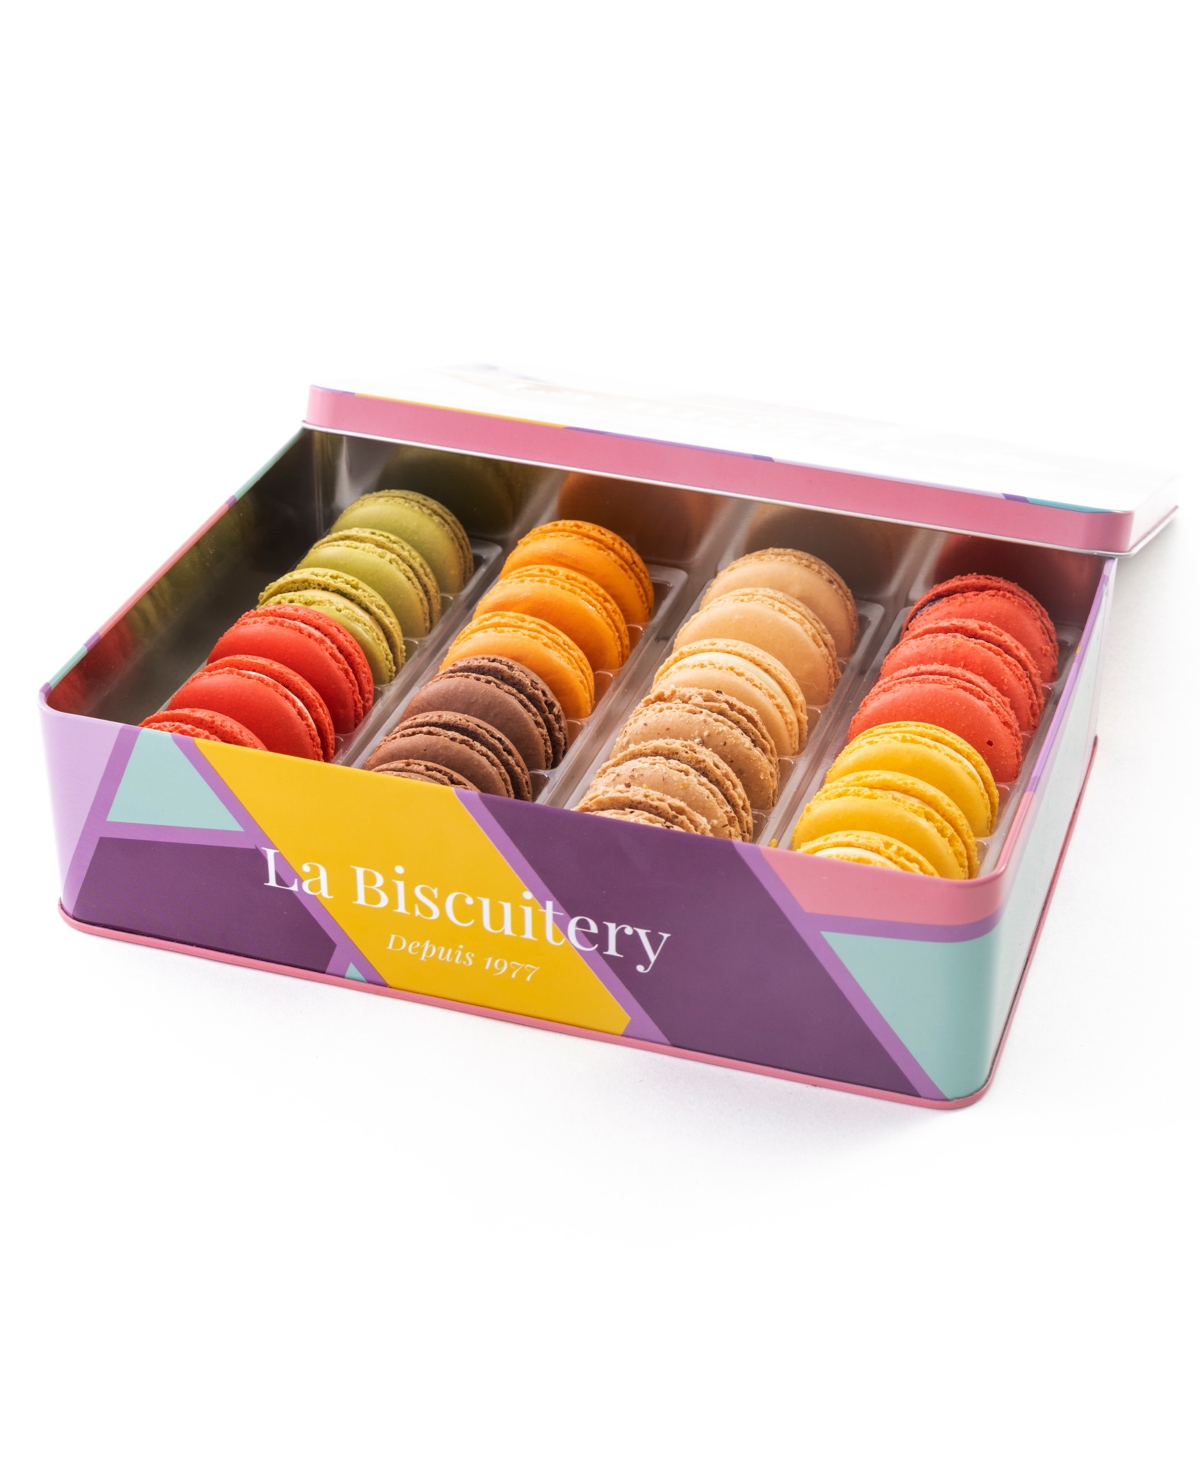 La Biscuitery The Signature Box Of 24 Macarons In No Color